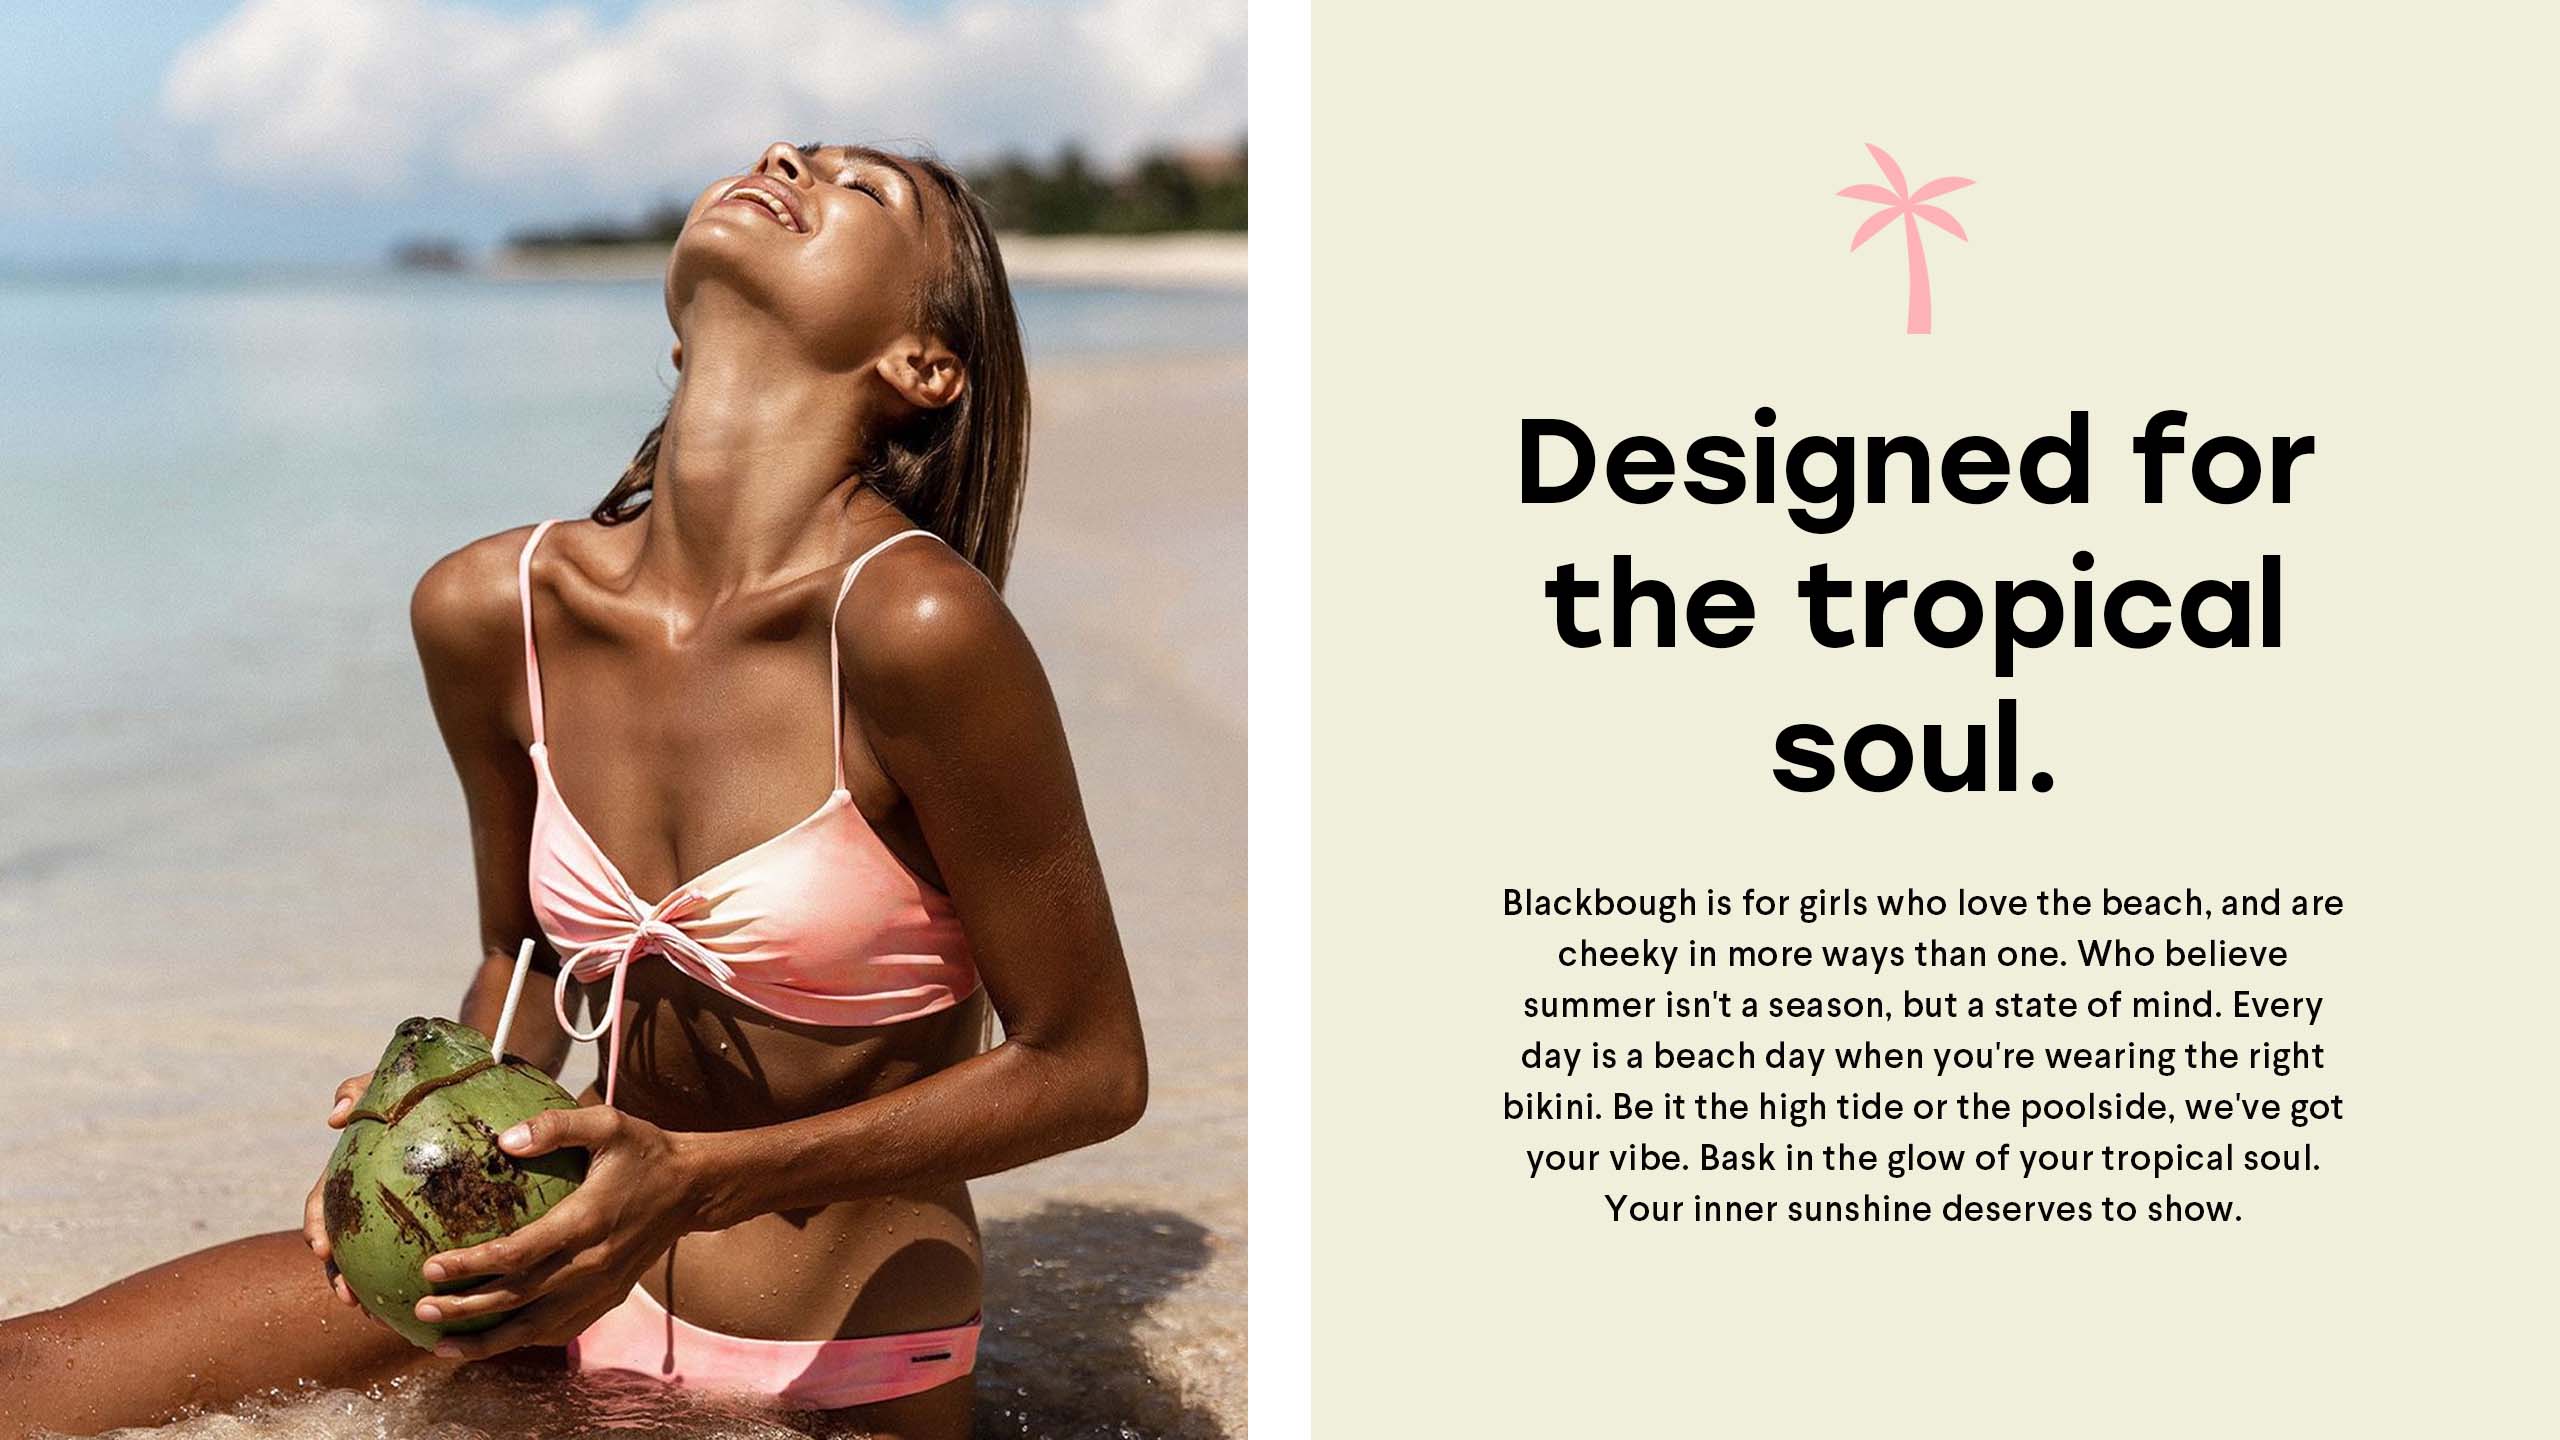 Photography with a poster designed for swimwear brand Blackbough